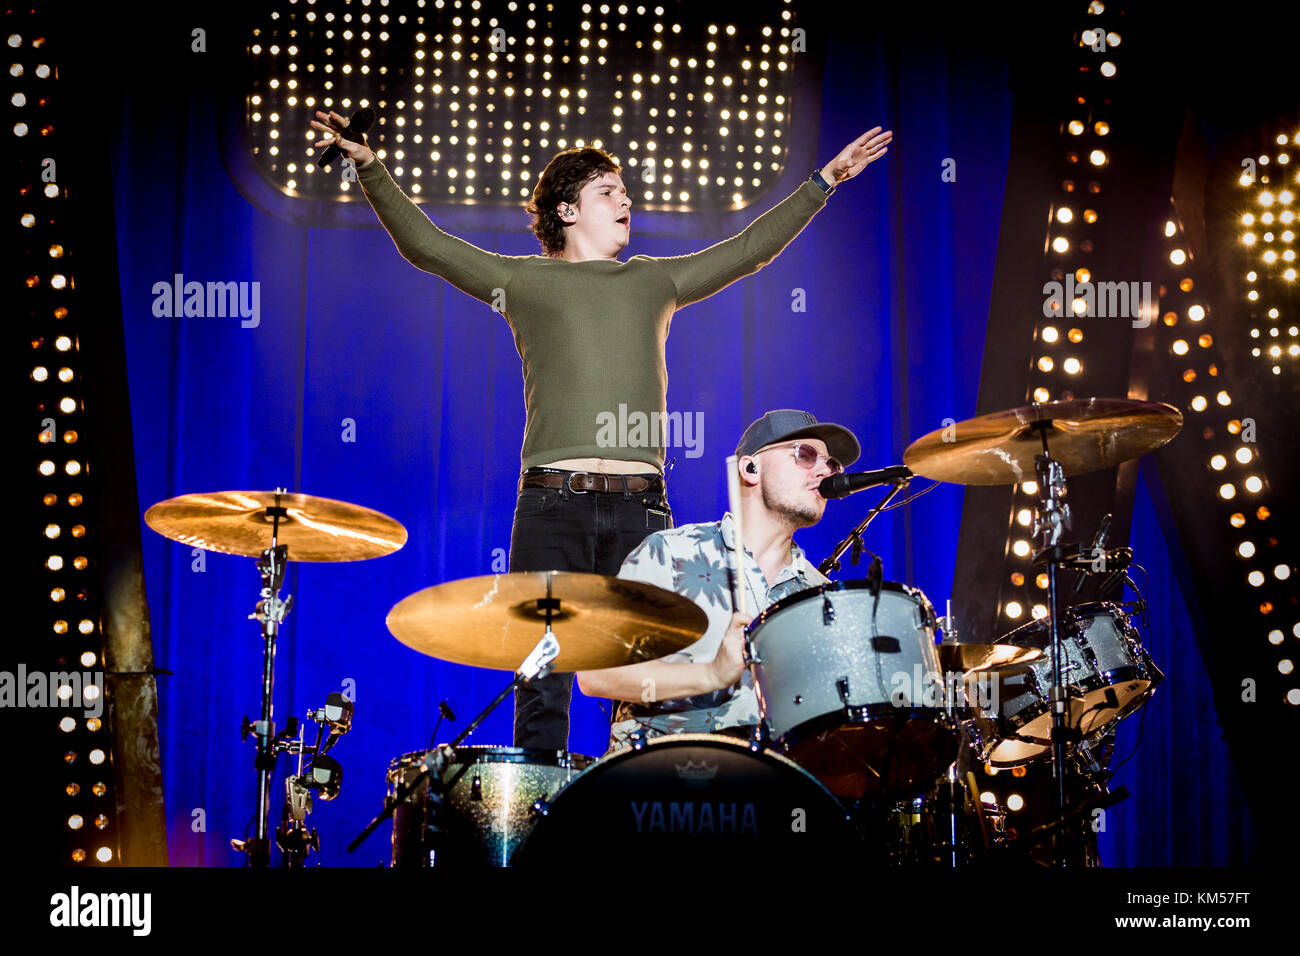 The Danish band Lukas Graham performs a live concert at the Mitsubishi Electric Halle in Düsseldorf. Here singer and songwriter Lukas Forchhammer is seen live on stage with drummer Mark Falgren. Germany, 13/03 2017. Stock Photo